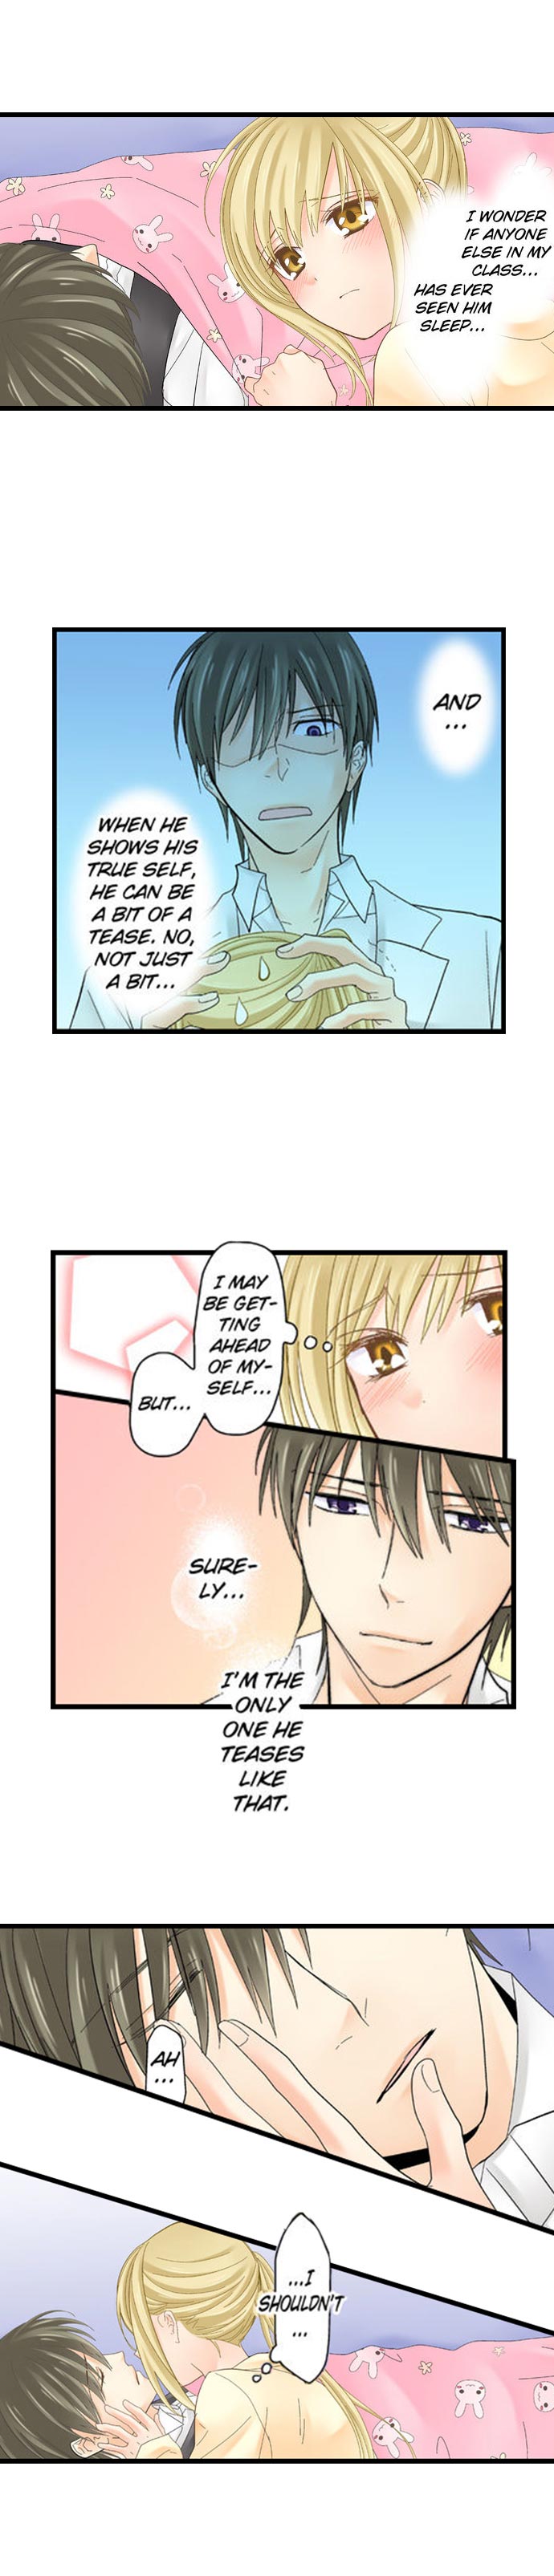 Running a Love Hotel with My Math Teacher - Chapter 13 Page 8